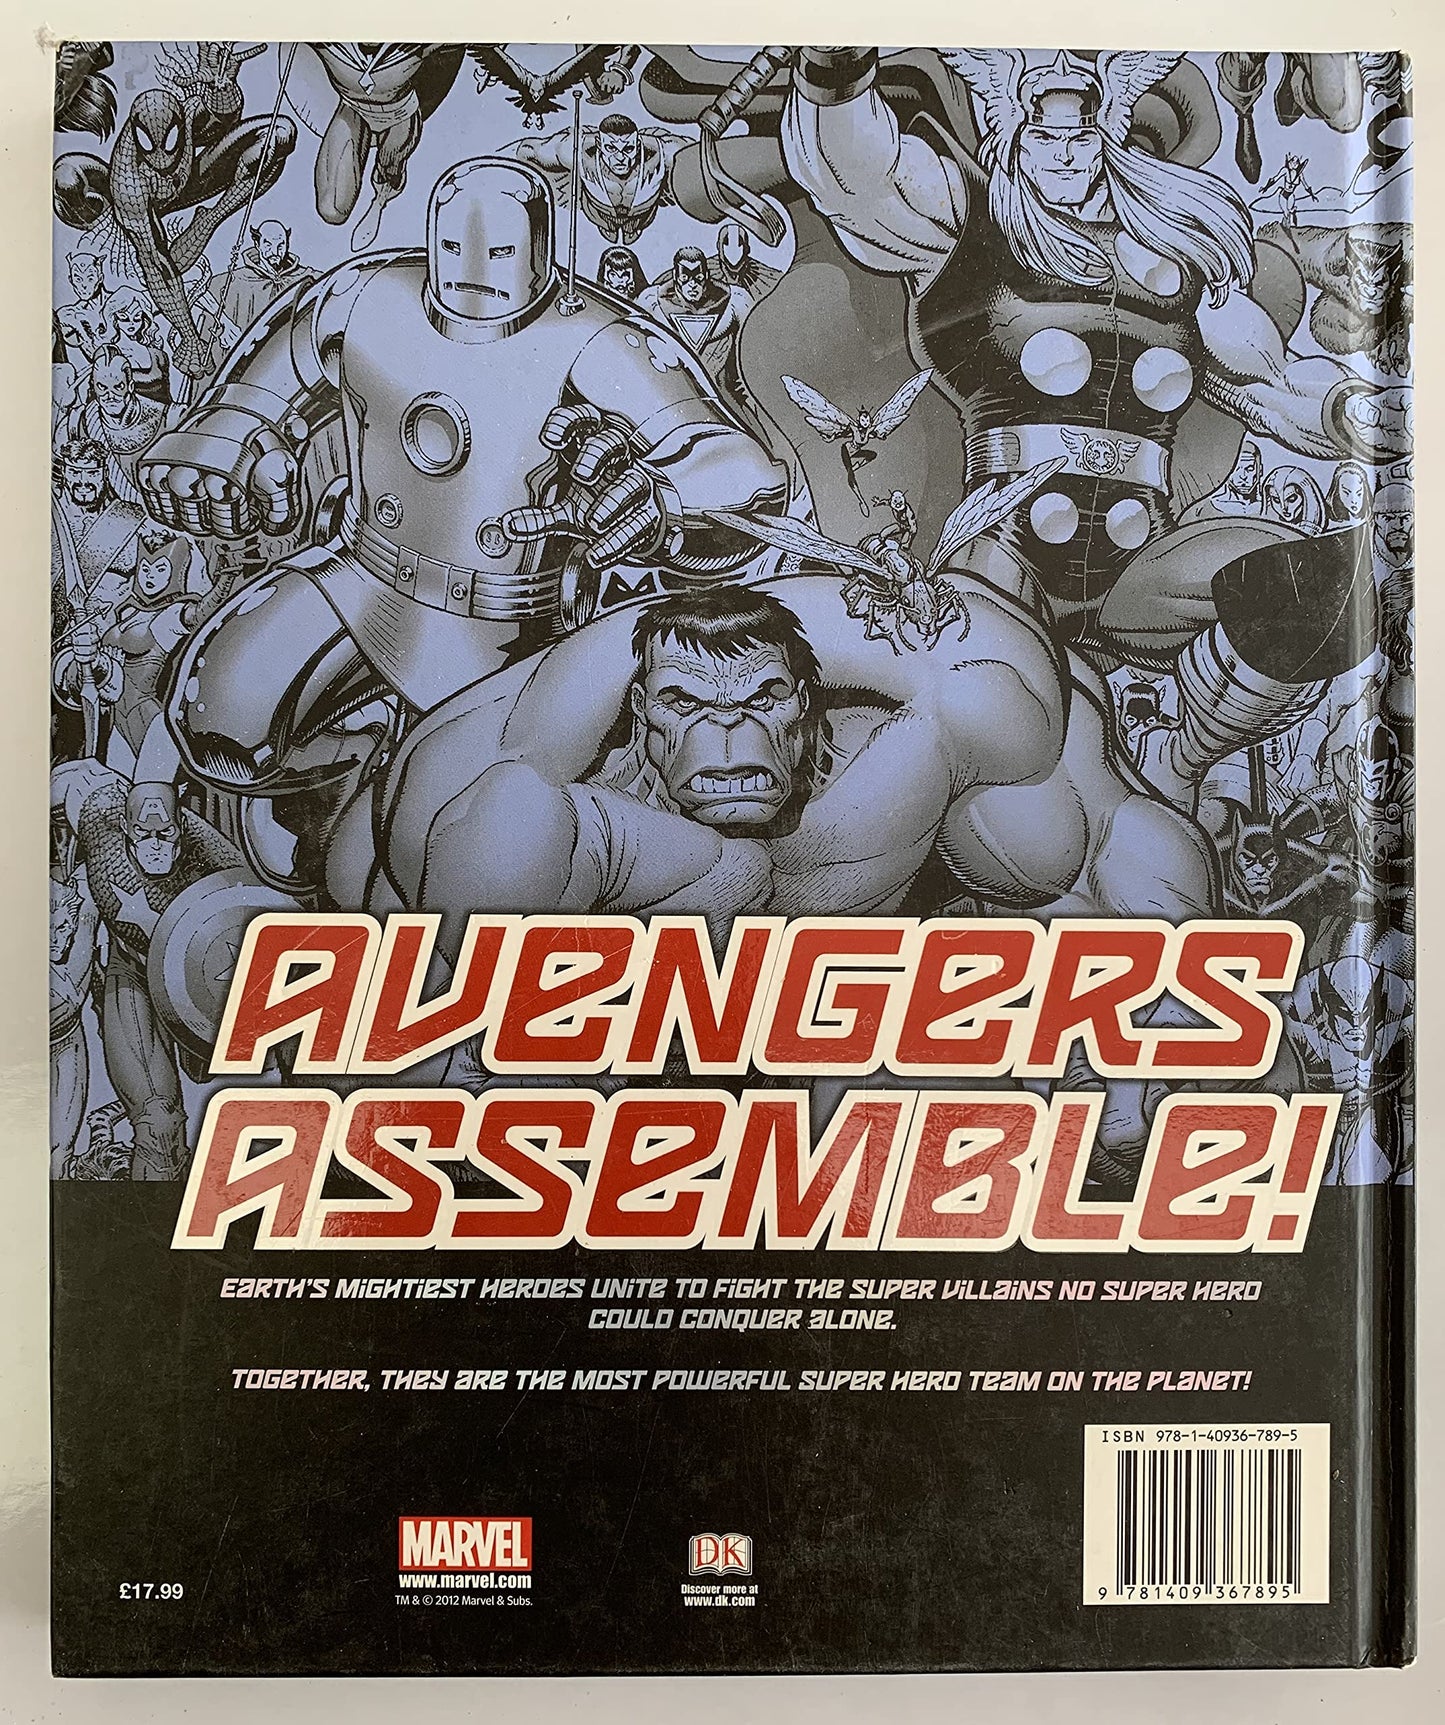 Vintage 2012 Marvel The Avengers - The Ultimate Guide To Earths Mightiest Heroes - Large Hardback Book